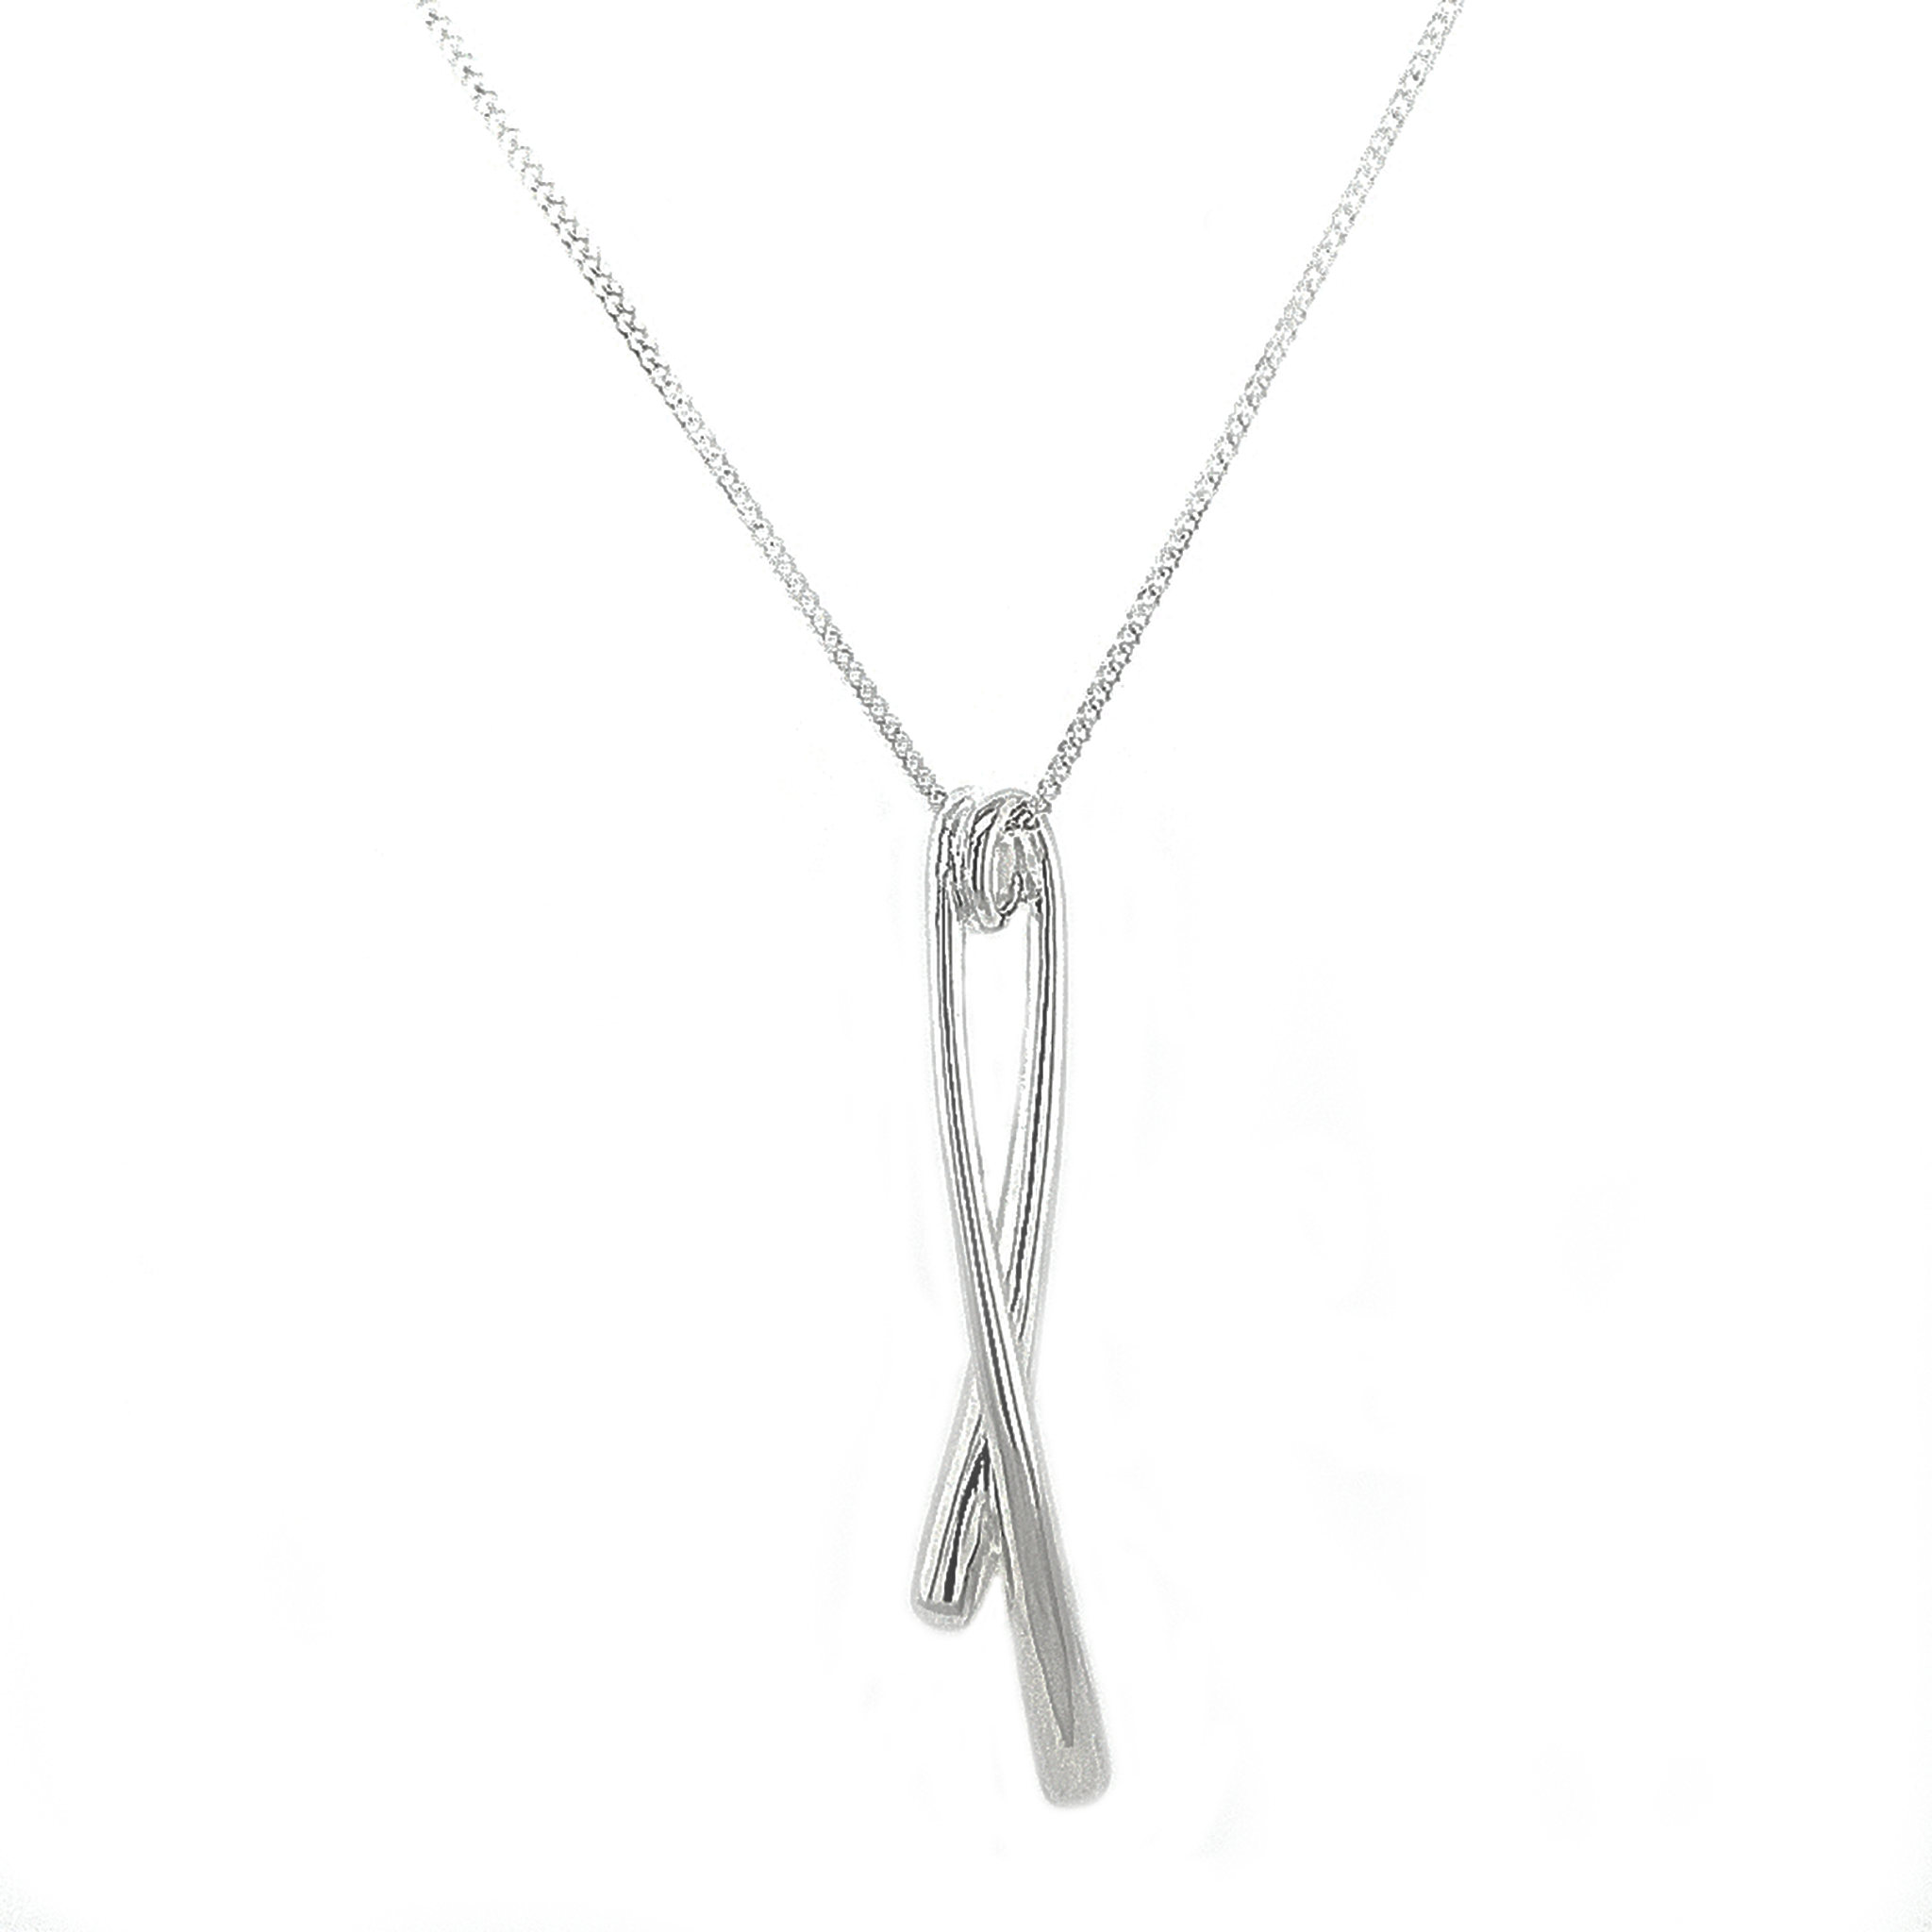 Silver Polished Tapered Loop Pendant